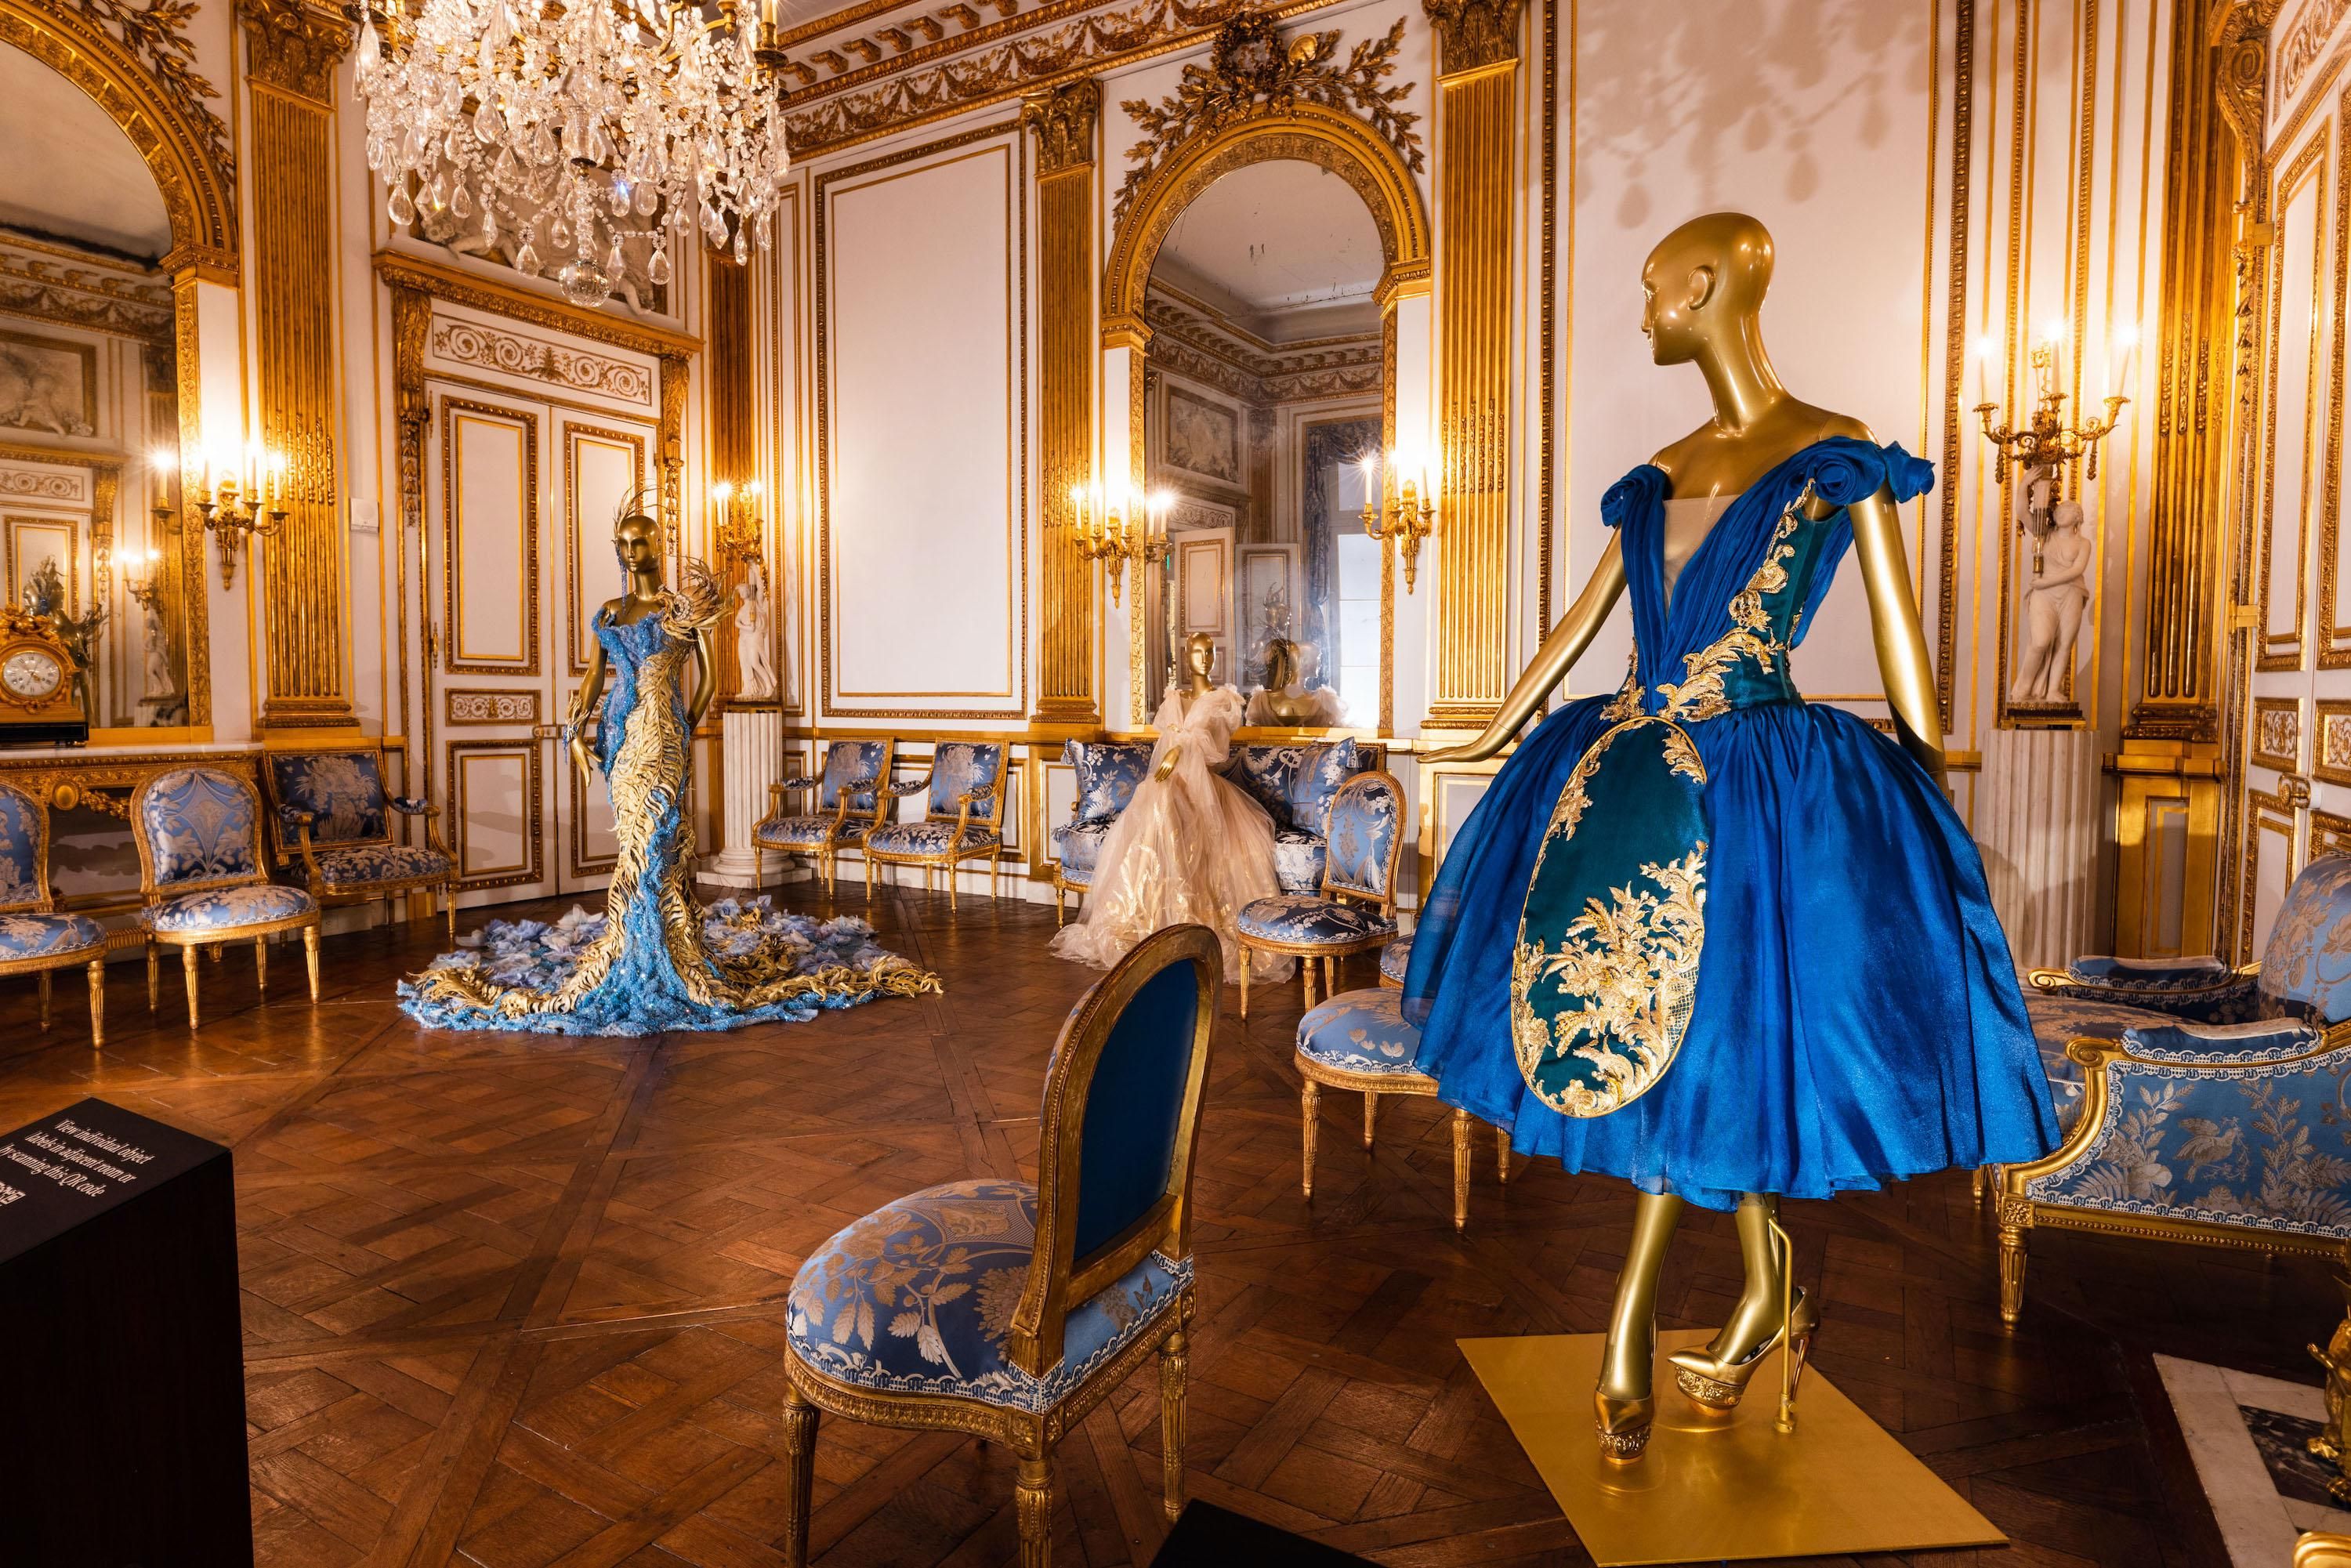 Chinese designer Guo Pei's otherworldly designs wow in Legion of Honor takeover